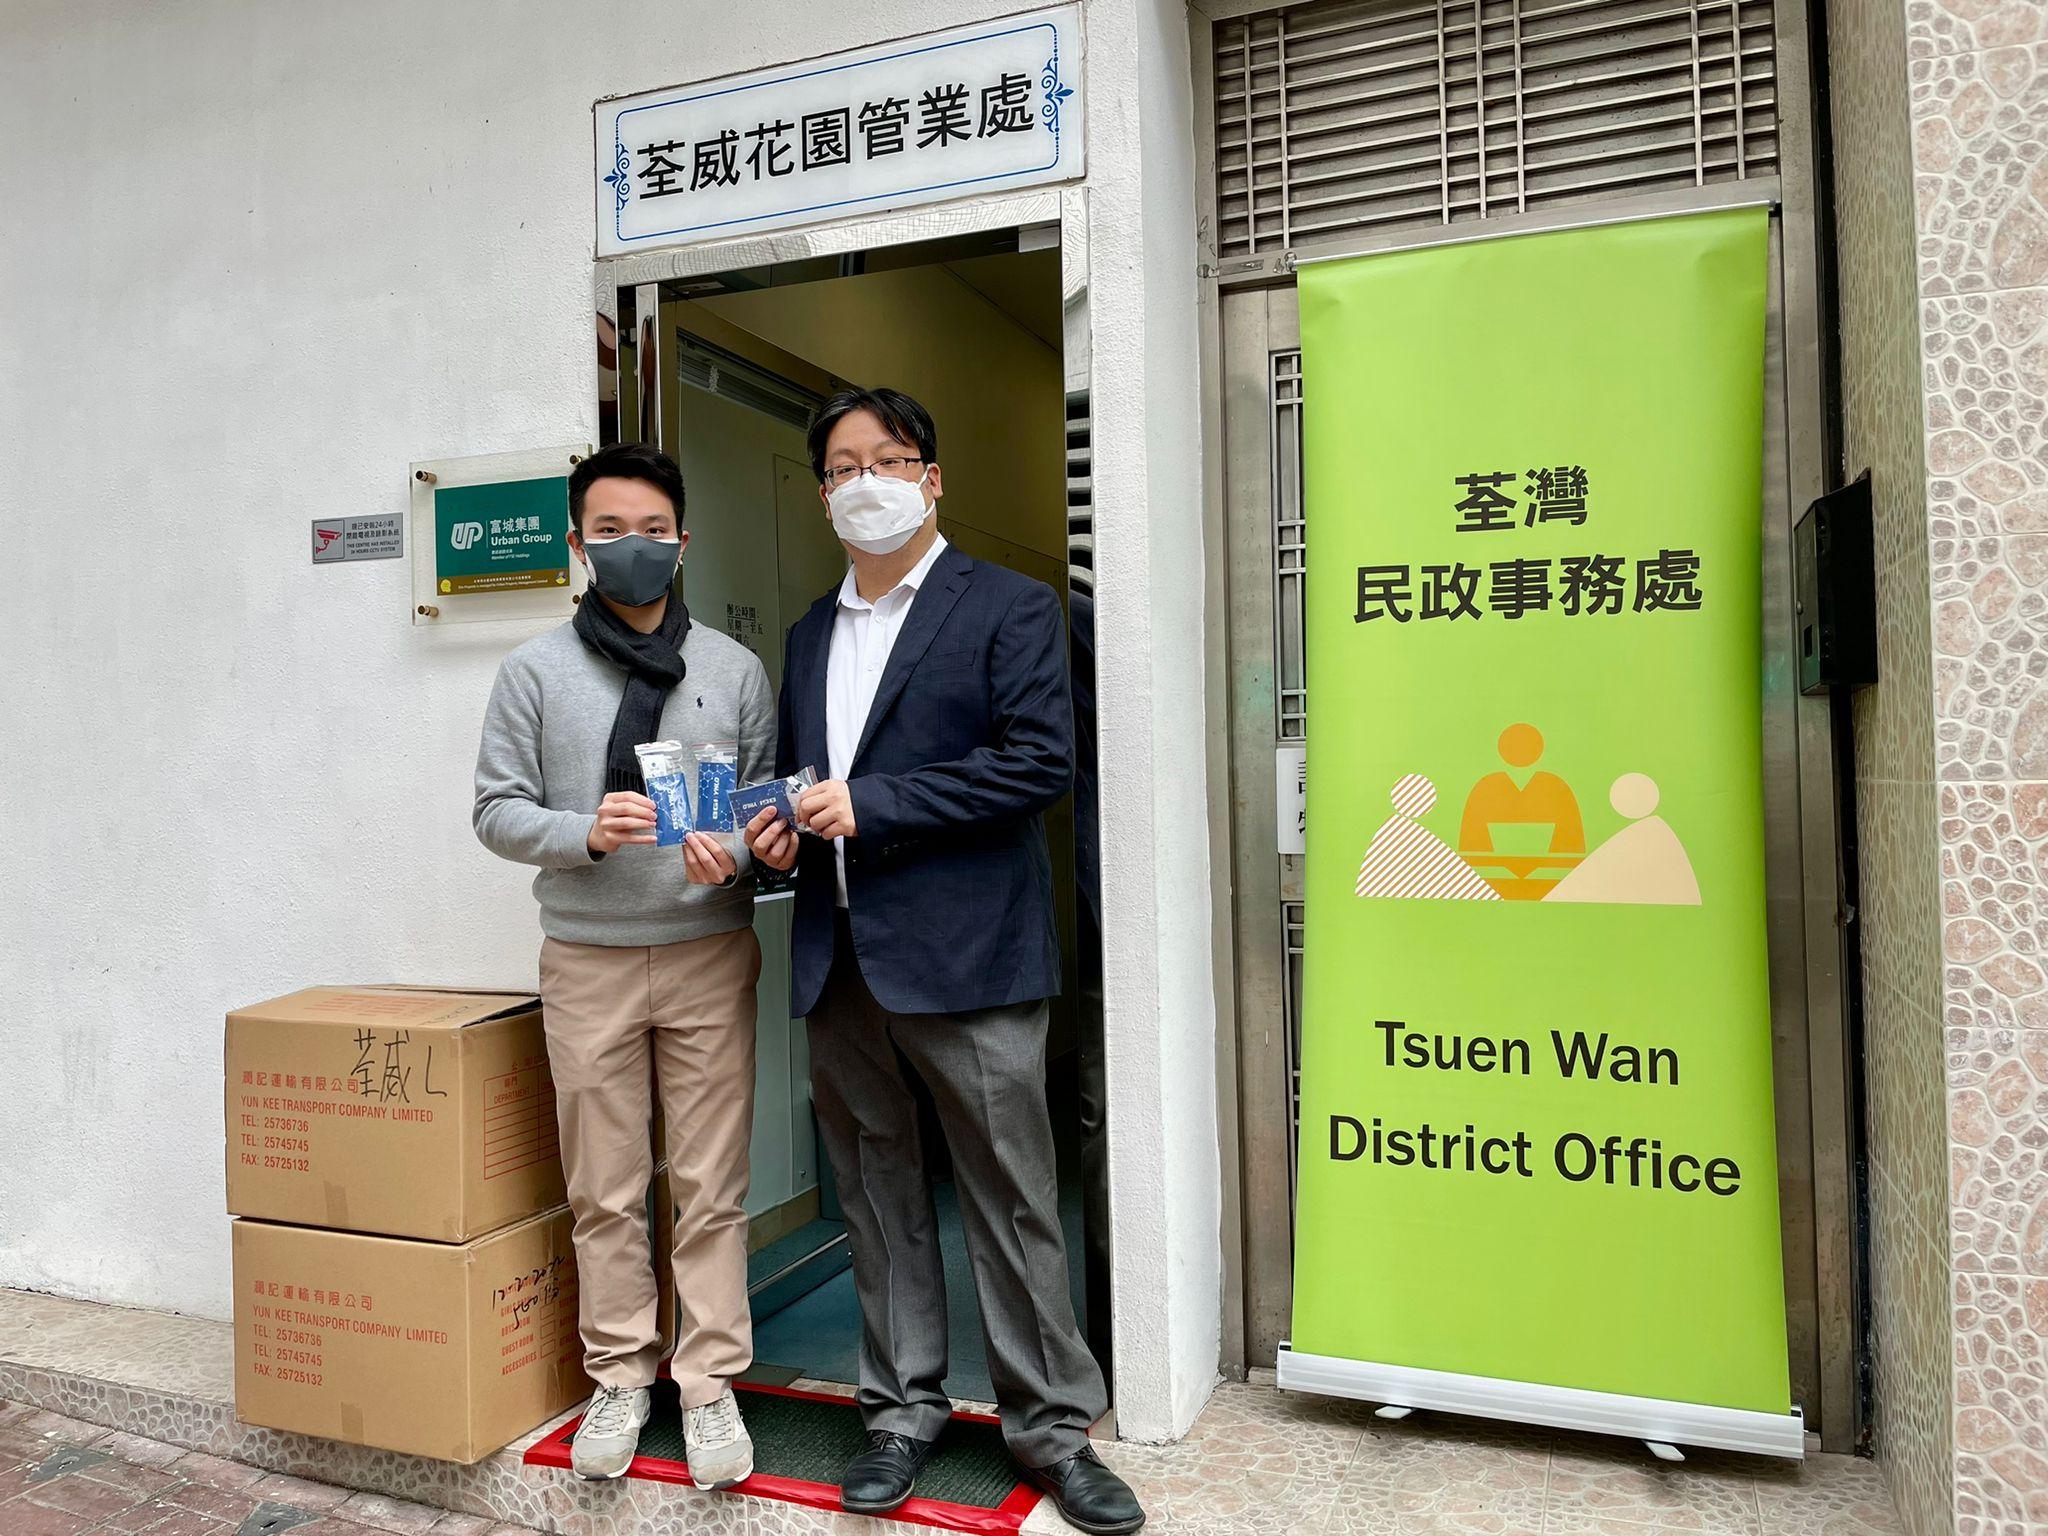 The Tsuen Wan District Office today (February 18) distributed COVID-19 rapid test kits to households, cleansing workers and property management staff living and working in Block L of Allway Gardens for voluntary testing through its property management company.

